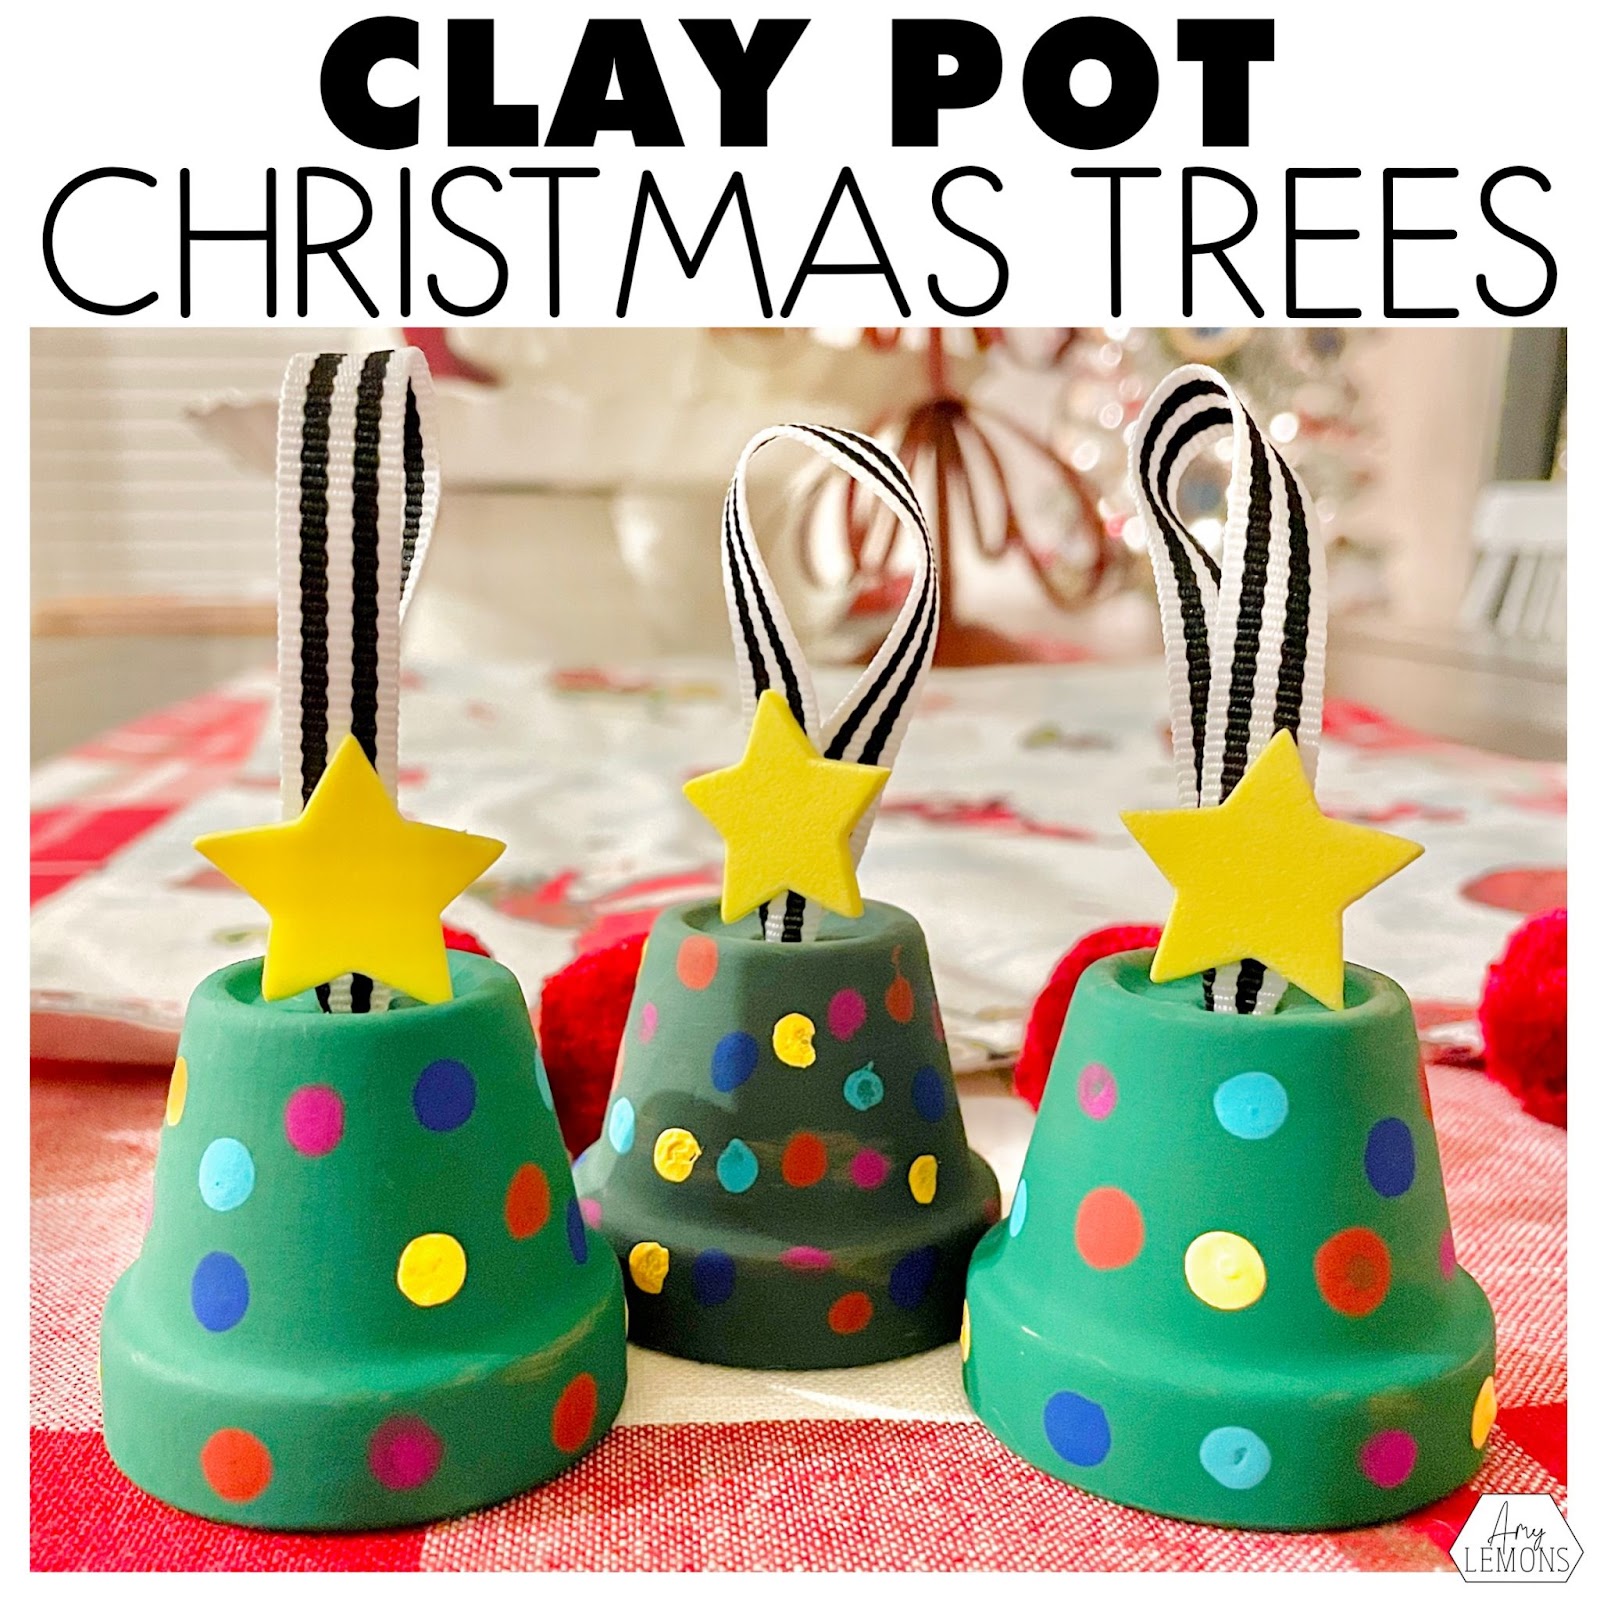 Christmas ornament made of a clay pot painted green with polka dot paint ornaments hung by a ribbon.